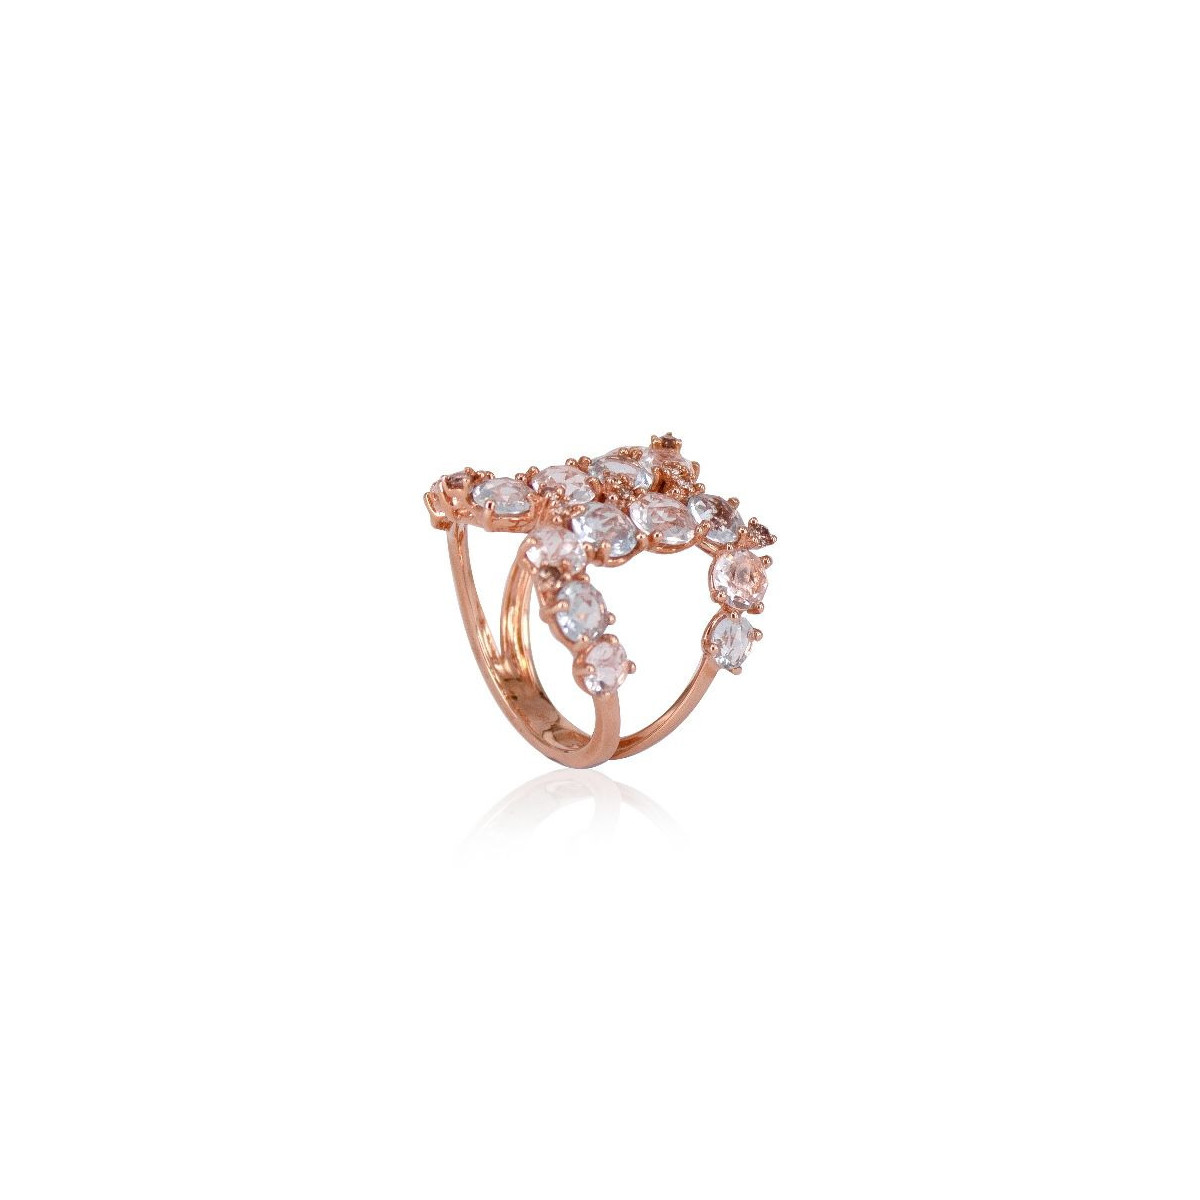 ROSE GOLD RING WITH DIAMONDS AND TOPAZ